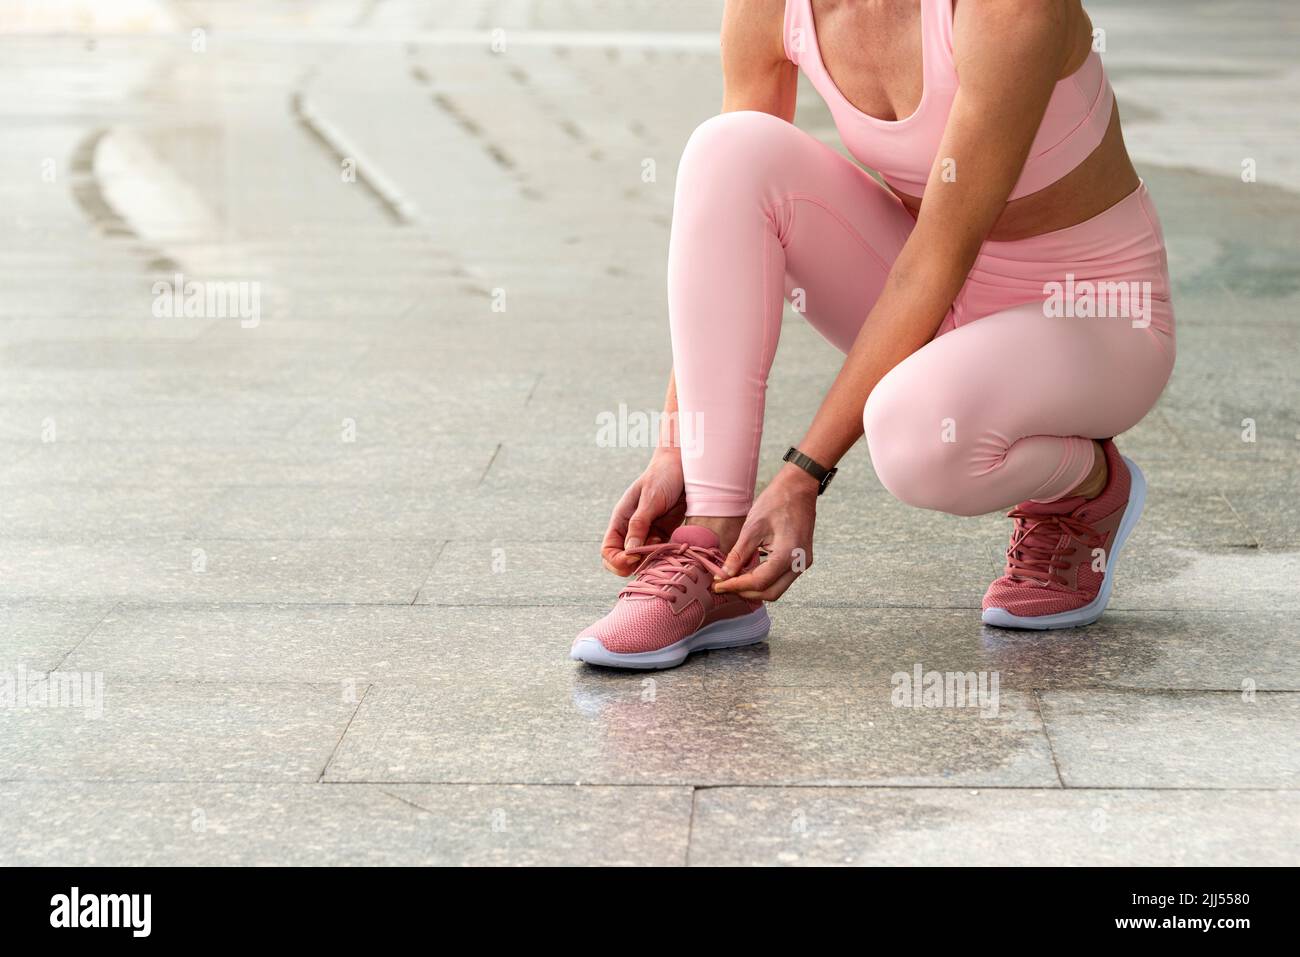 Woman tying her shoes before going running or exercise Stock Photo